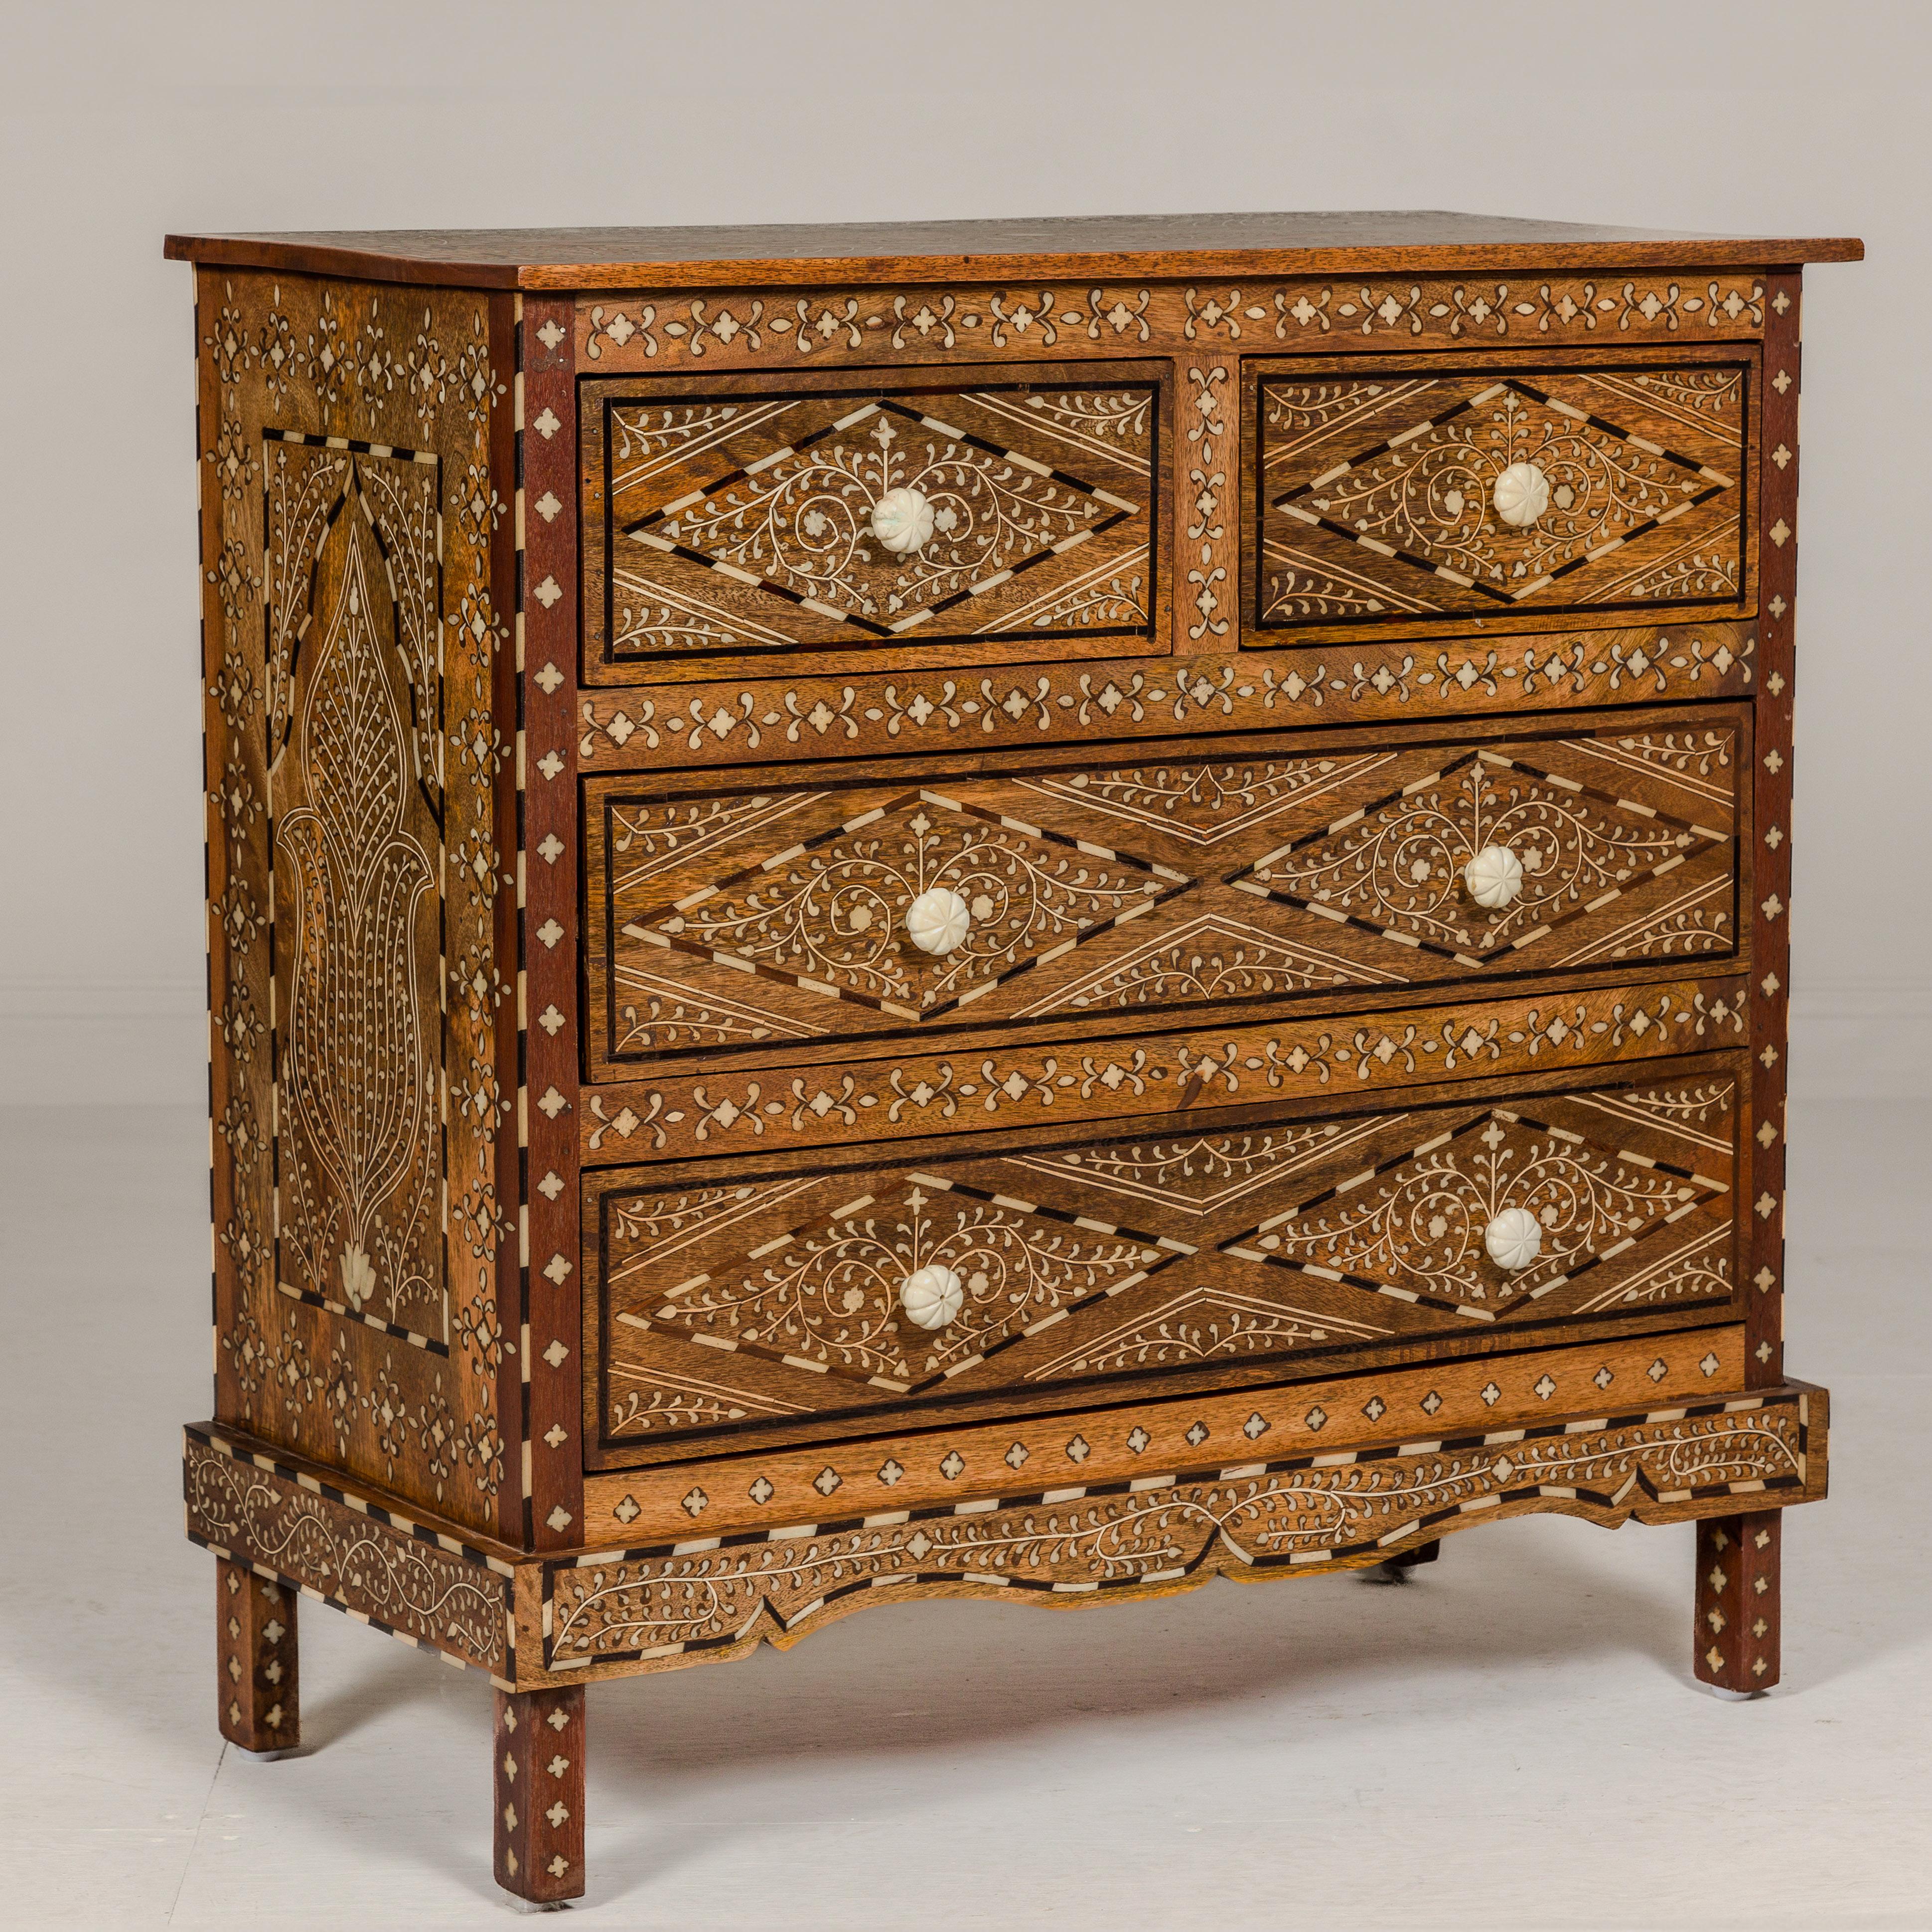 An Anglo-Indian style four-drawer chest with foliage-themed bone inlaid décor. This Anglo-Indian style four-drawer chest is an exquisite embodiment of craftsmanship and artistry. Its allure lies in the meticulous bone inlay work, which adorns the